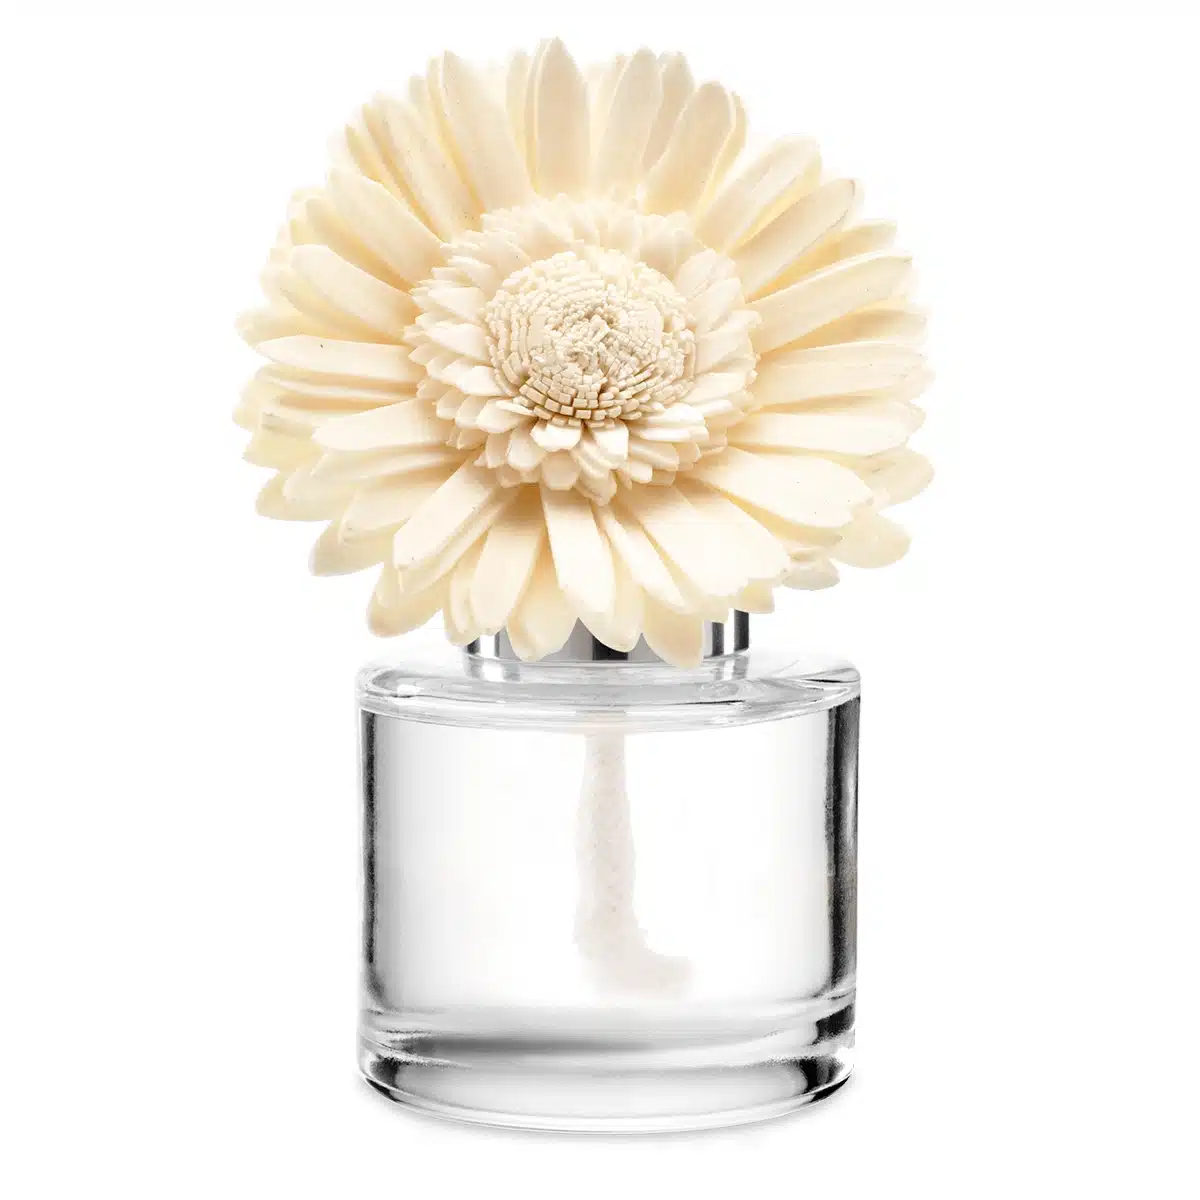 Pink Cotton Scentsy Fragrance Flower – Dainty Daisy - The Candle